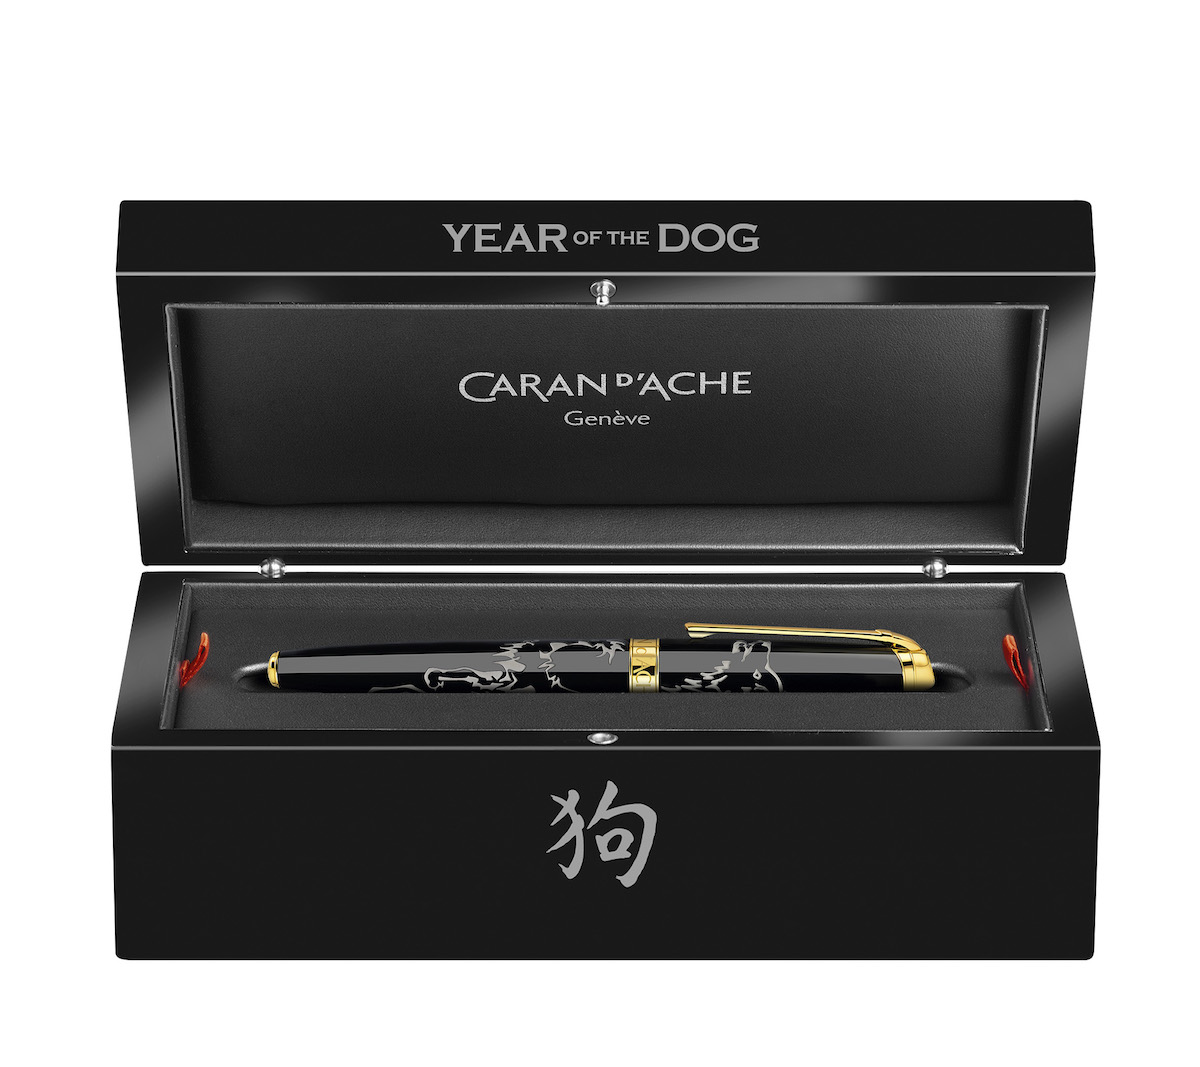 caran d'ache writing instruments limited edition gold swiss made switzerland quality